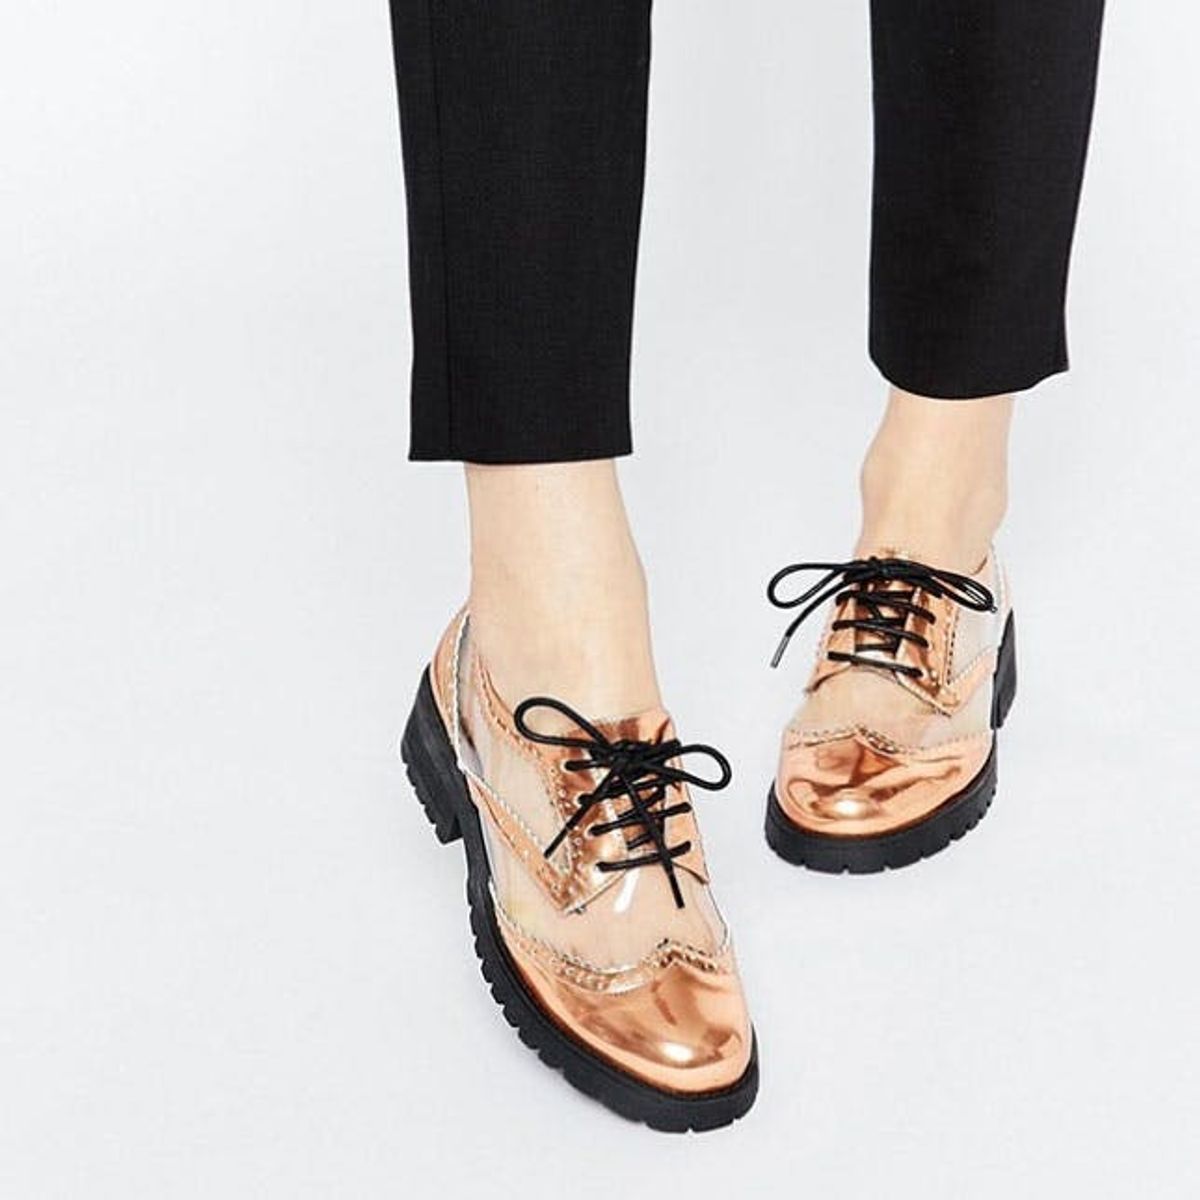 16 Reasons to Give Up Heels This Fall